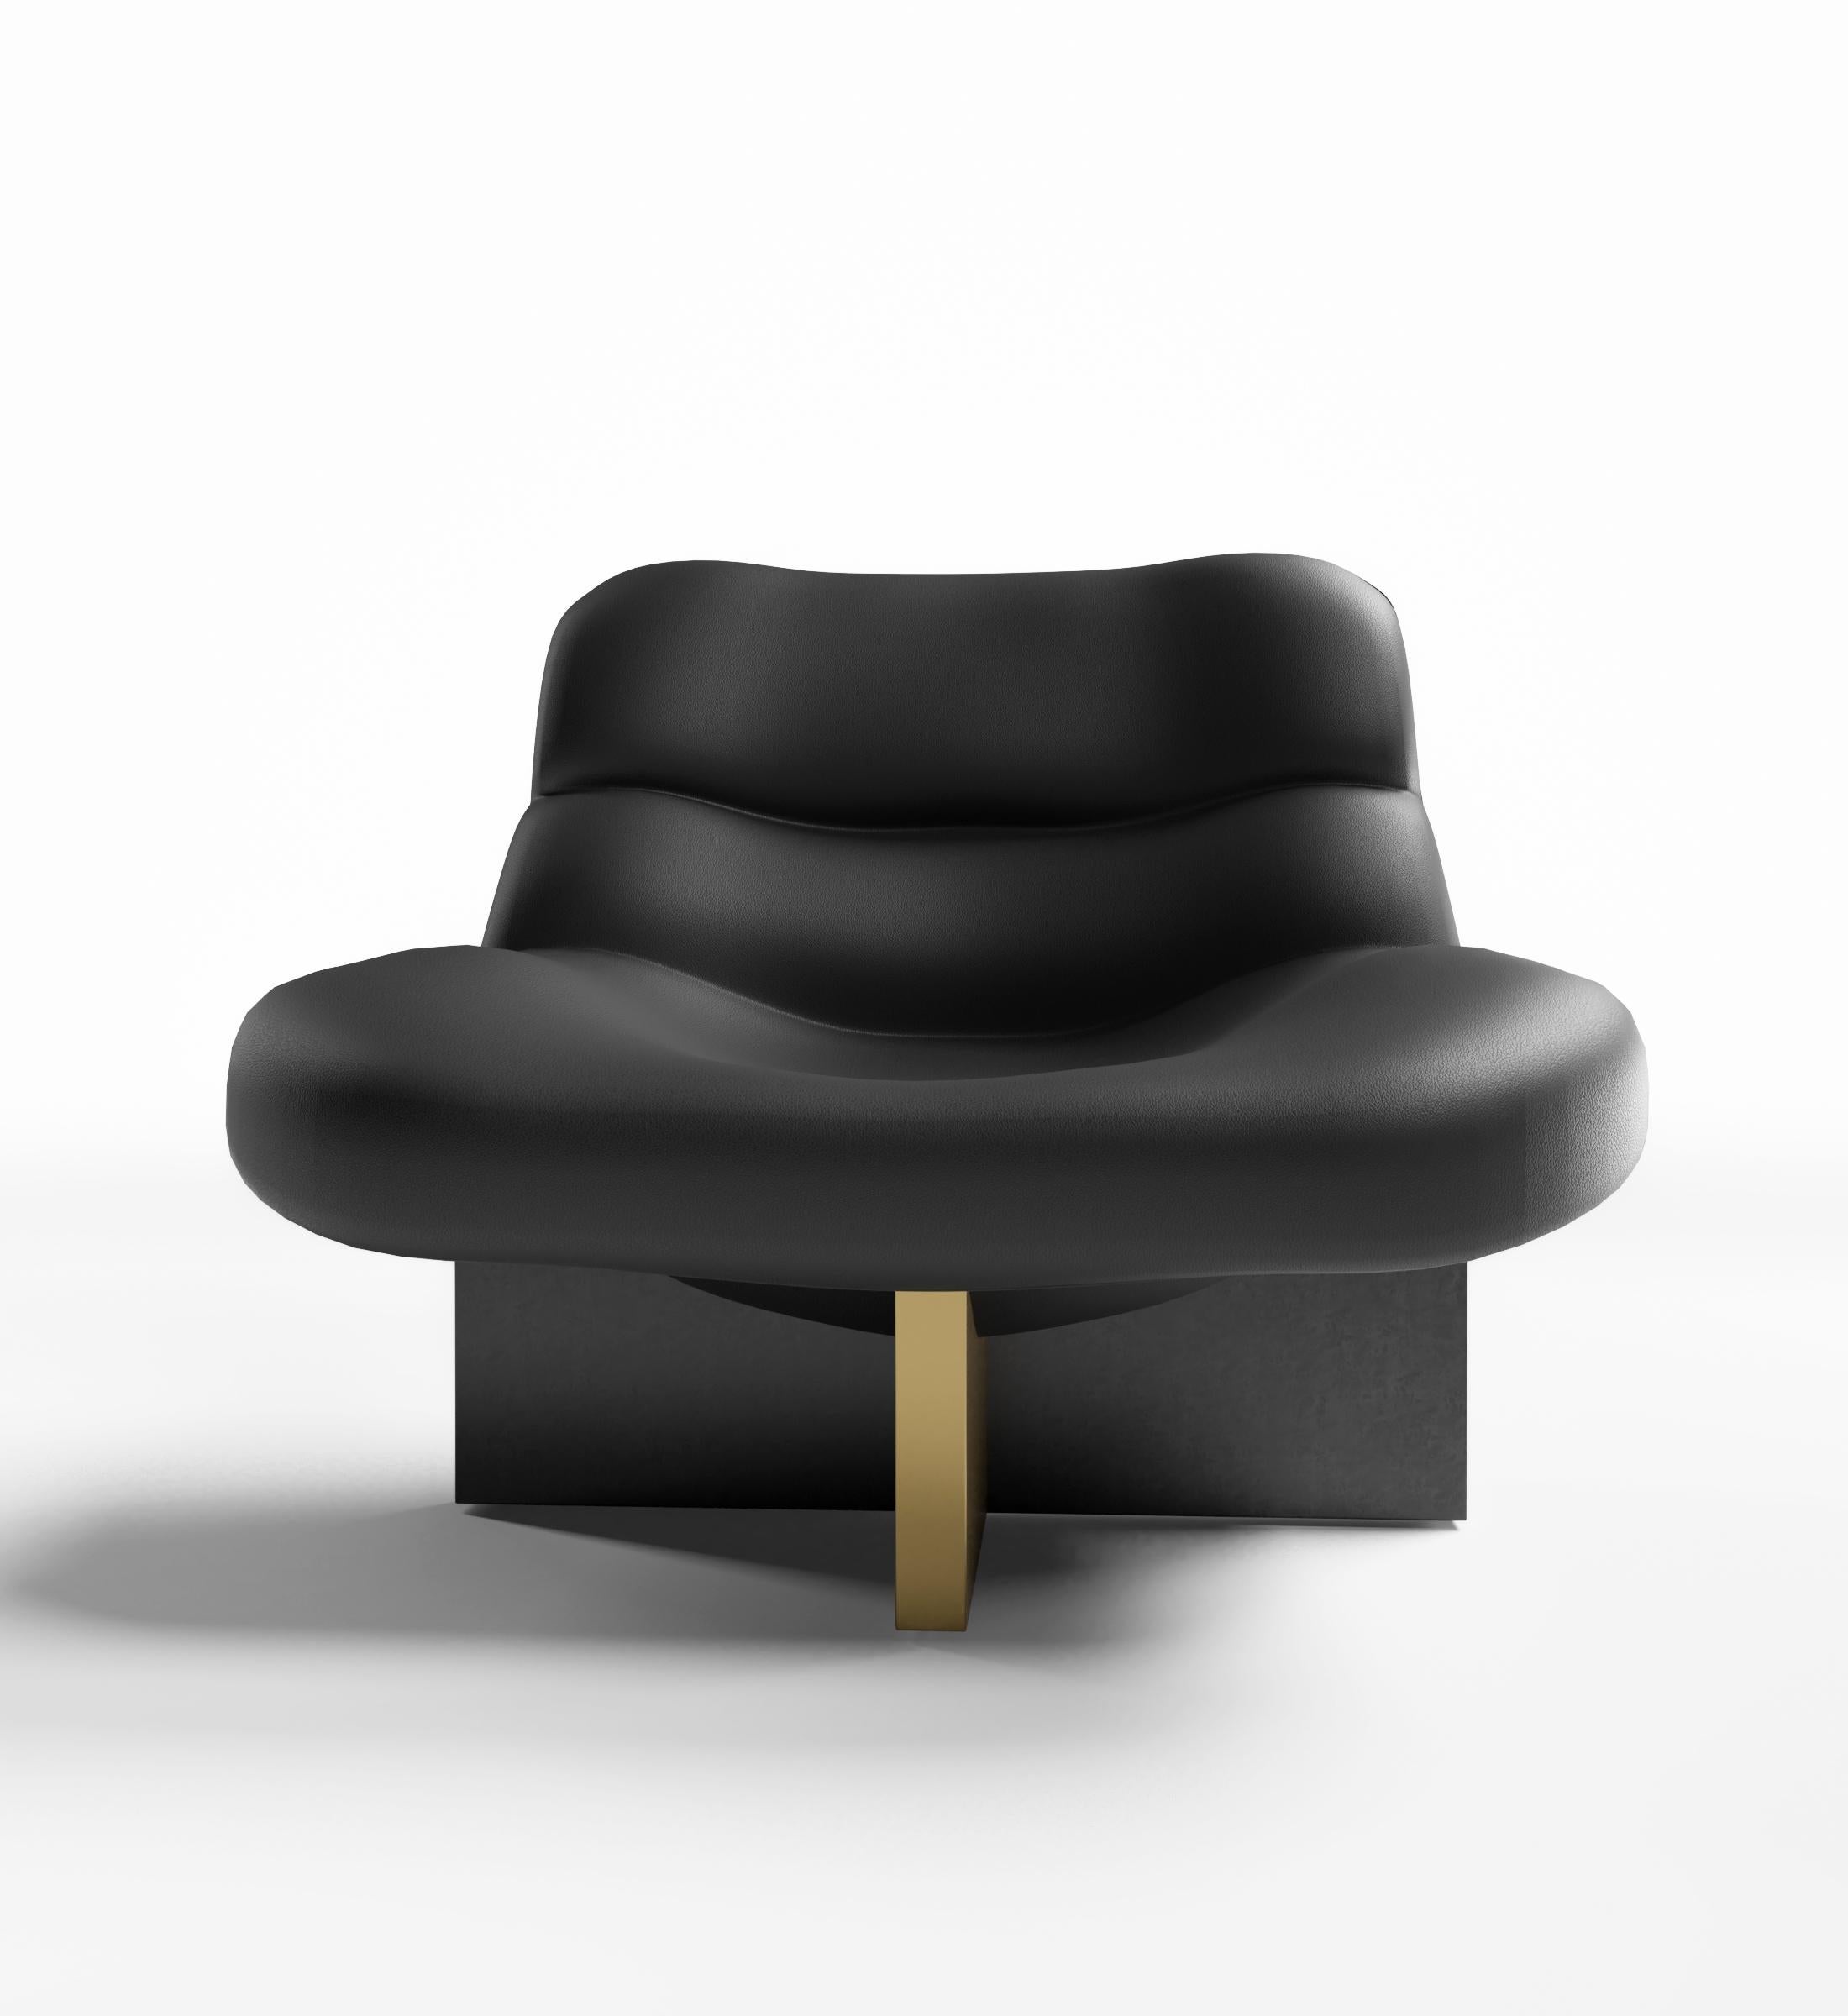 With its distinctive cross base, the Zuma lounge chair is a modern classic. To be admired both from a distance as well as while stretching out in its comfortable embrace, this Ortiz Milano chair will look great in any room. As shown, the chair